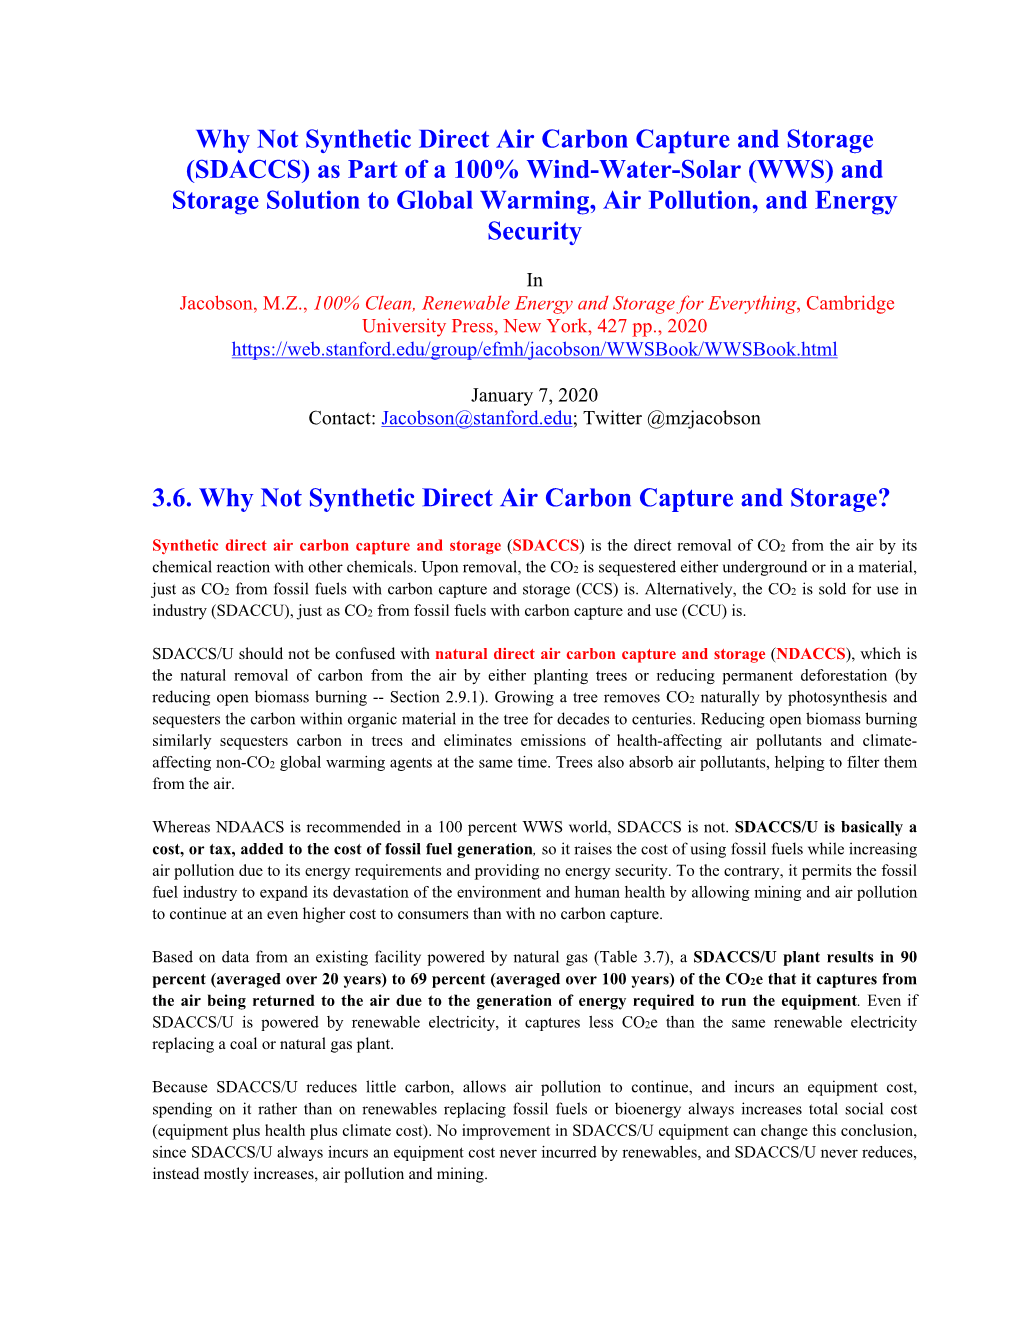 Why Not Synthetic Direct Air Carbon Capture And